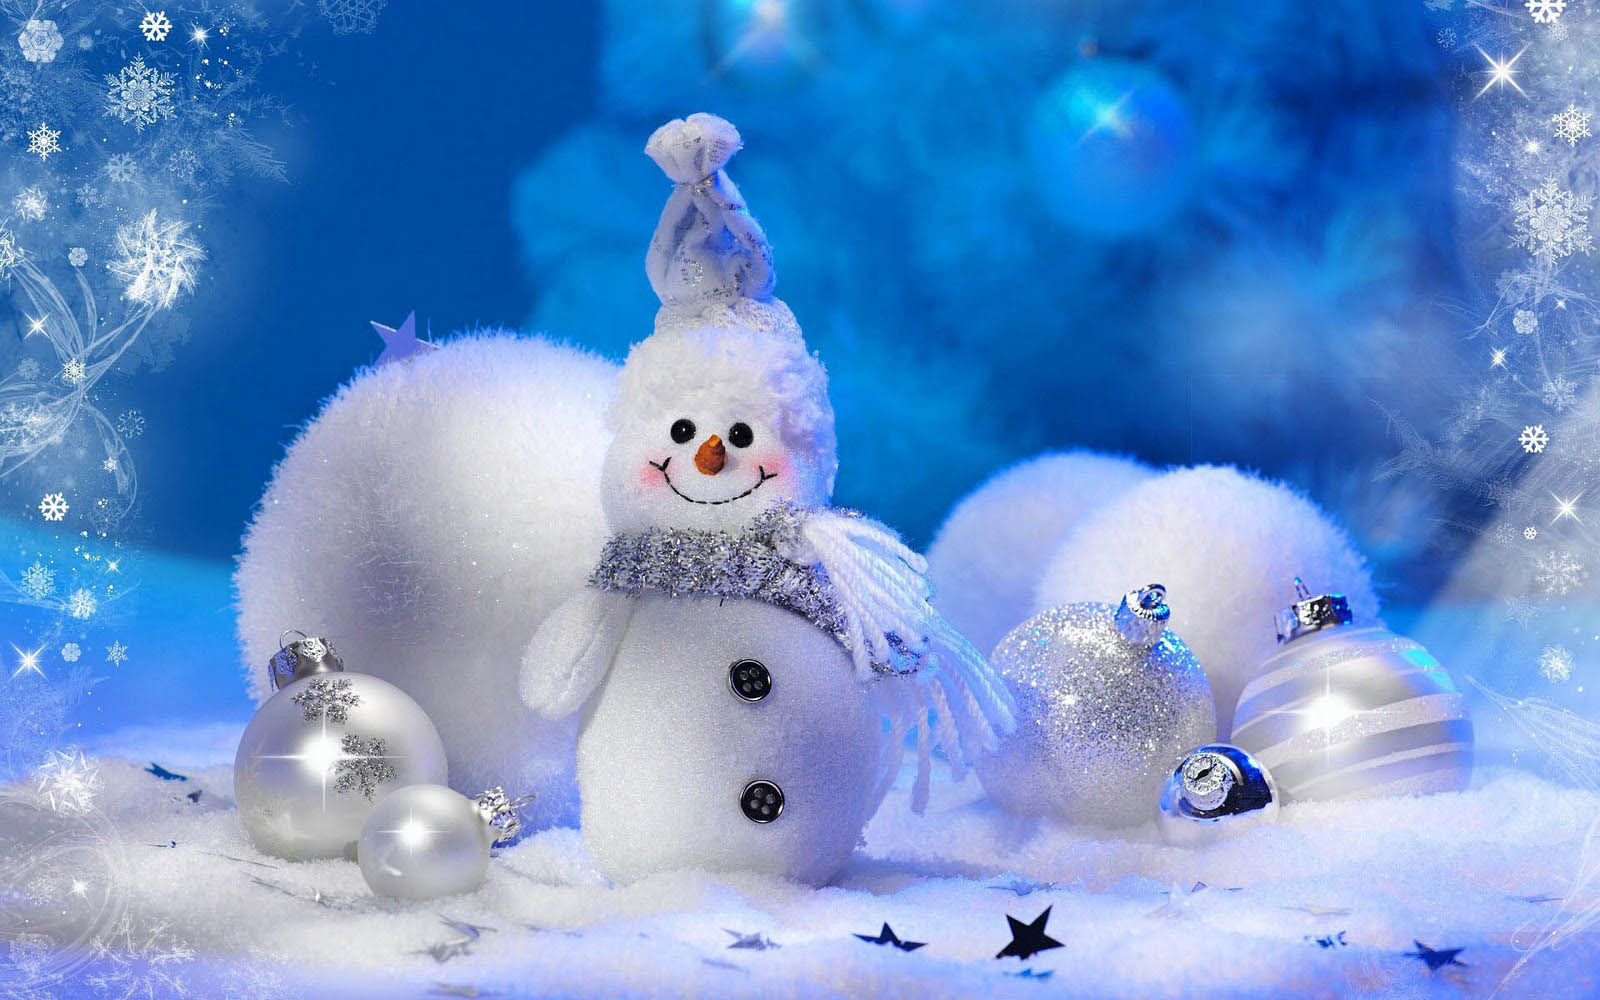 Tag Snowman Wallpapers Backgrounds Photos Picturesand Images for 1600x1000